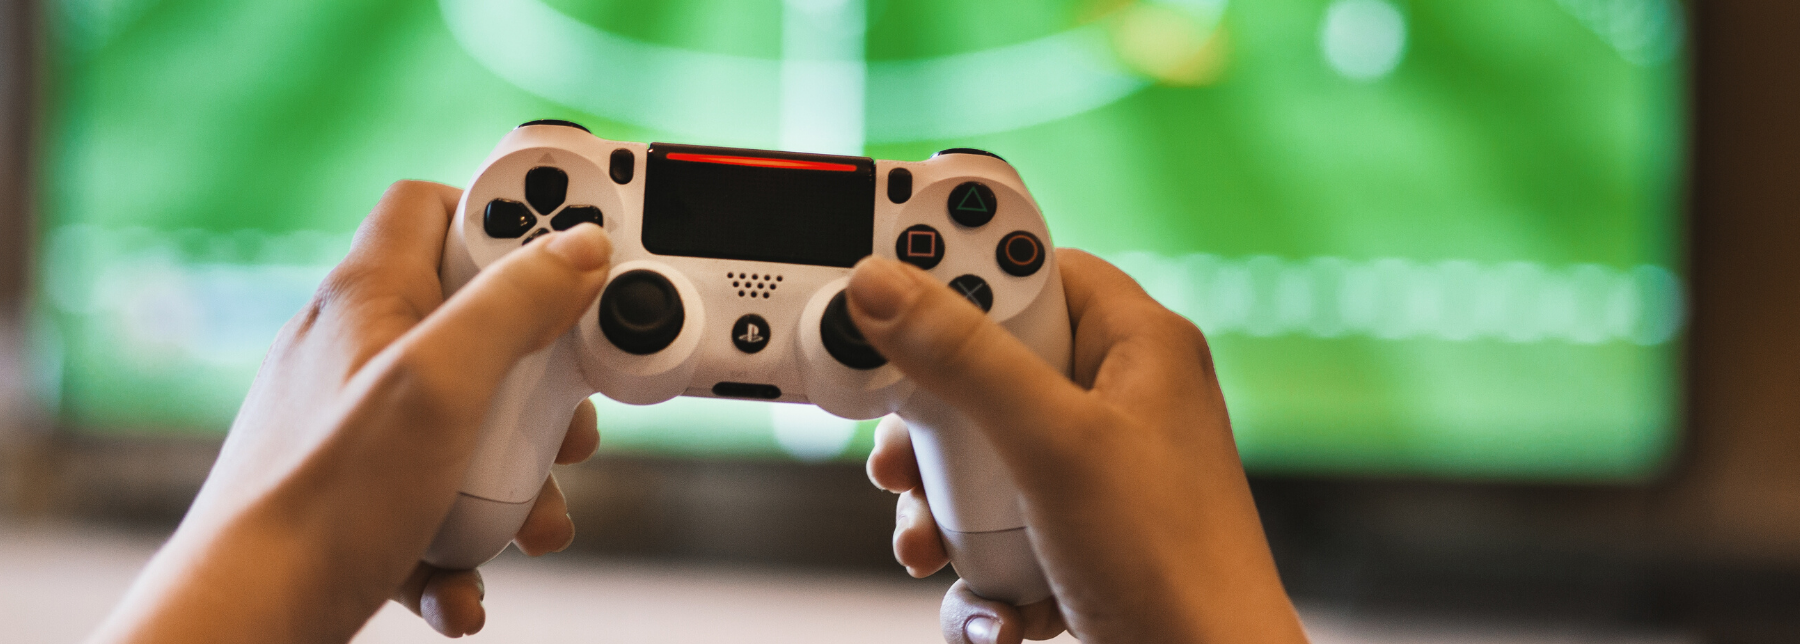 Image of hands holding a gaming console